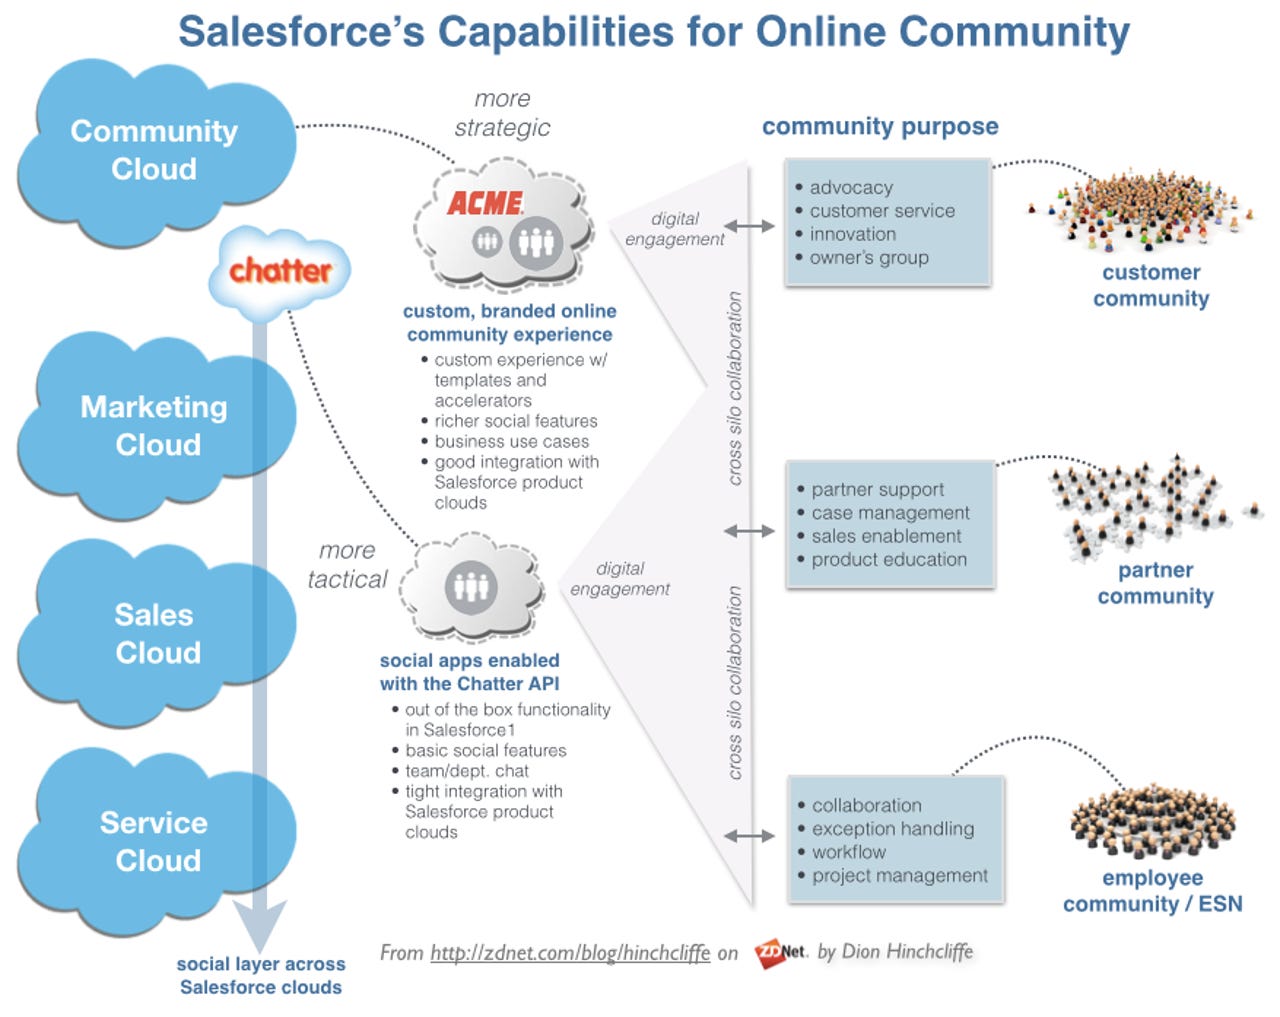 Salesforce's Capabilities for Online Community: Chatter and Community Cloud